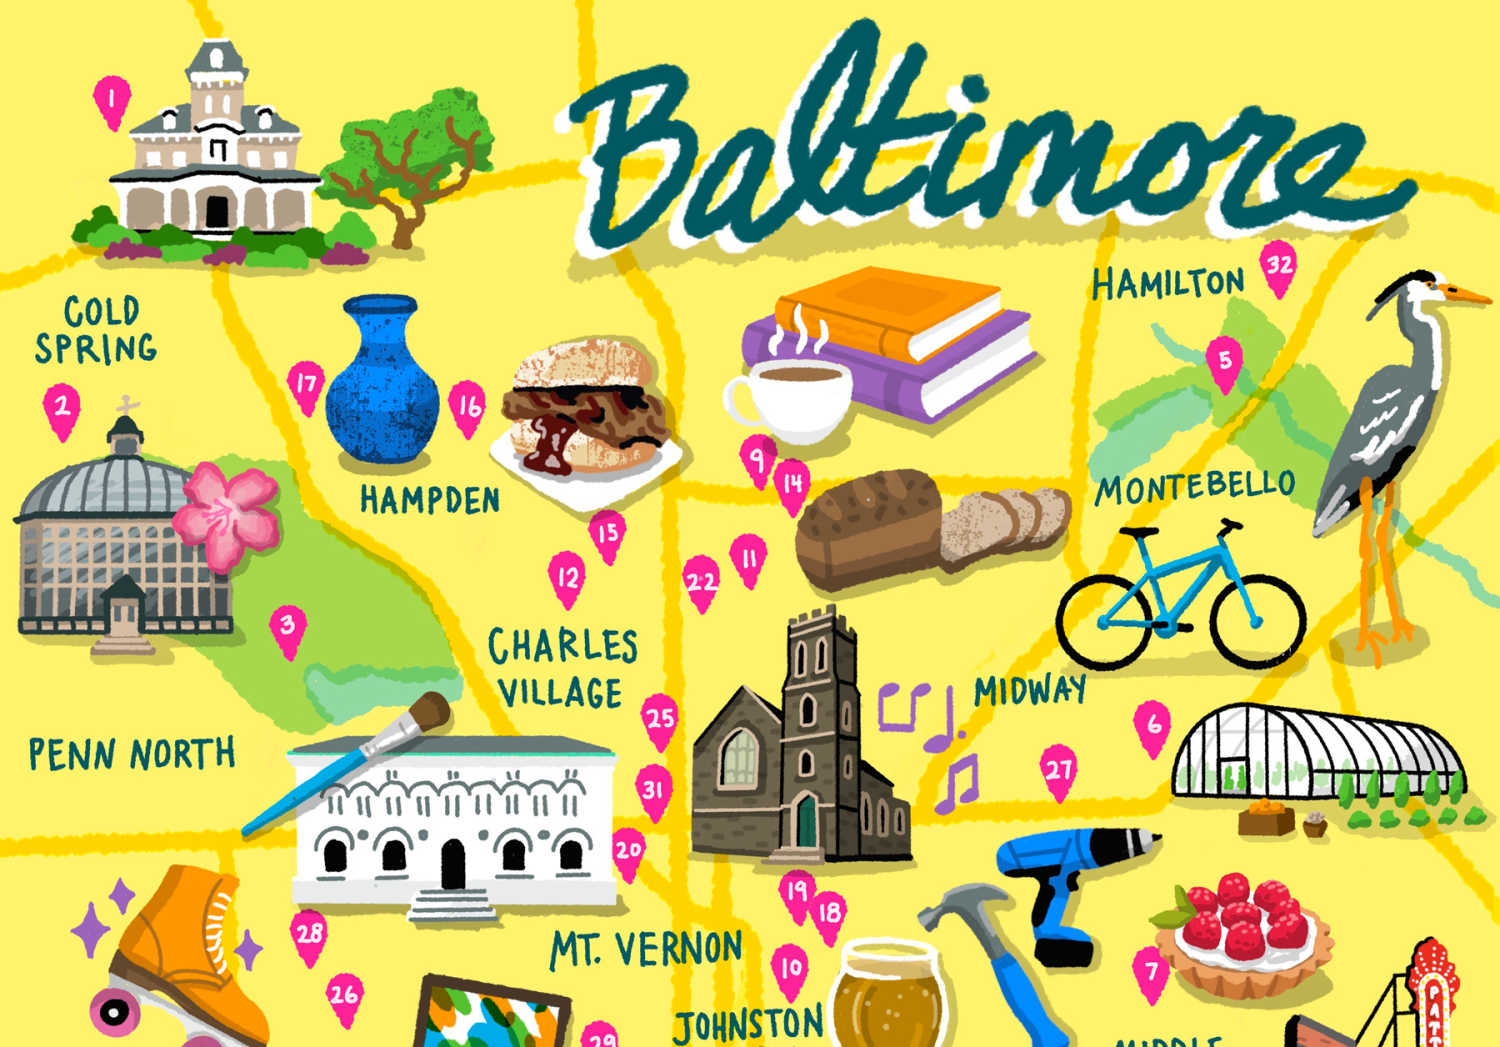 Are you wondering what to do in Baltimore City? Here are our team's favorite hidden gems, with a community focus.